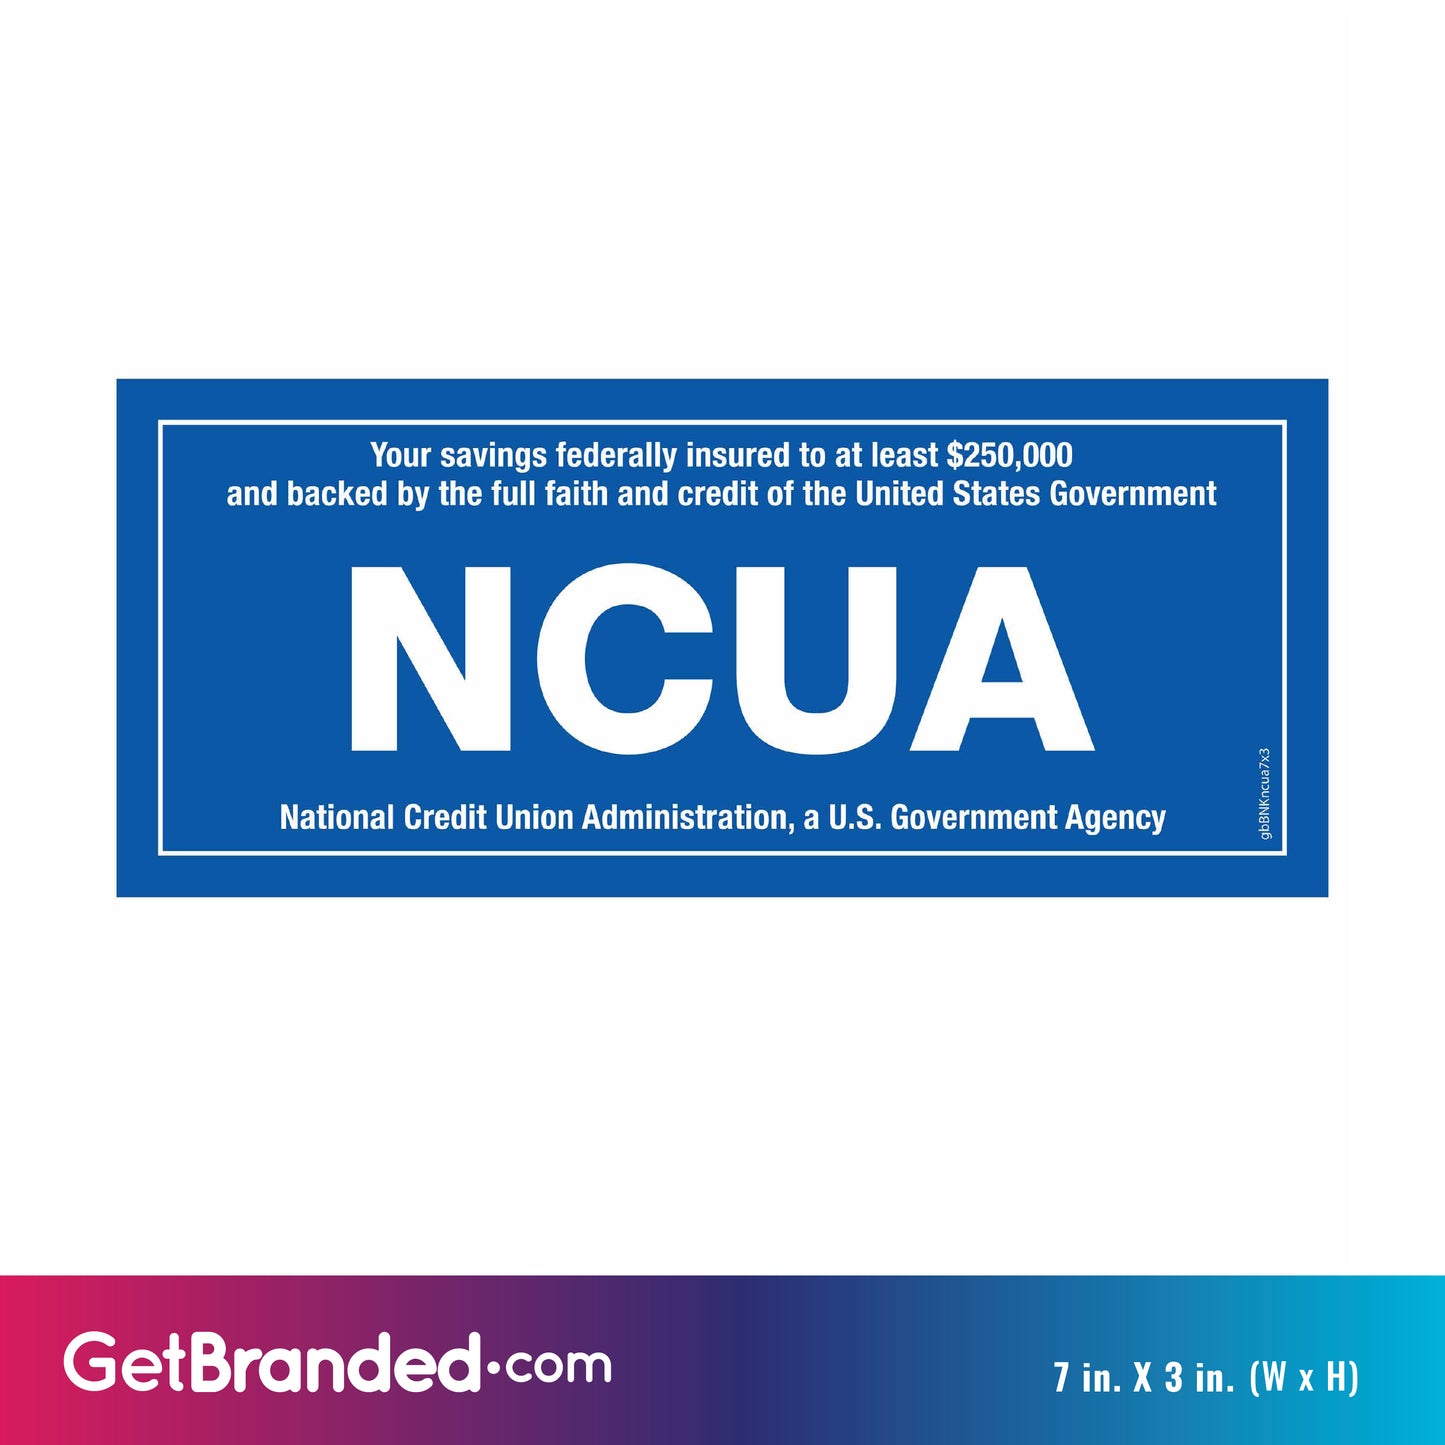 NCUA Credit Union Decal size guide.